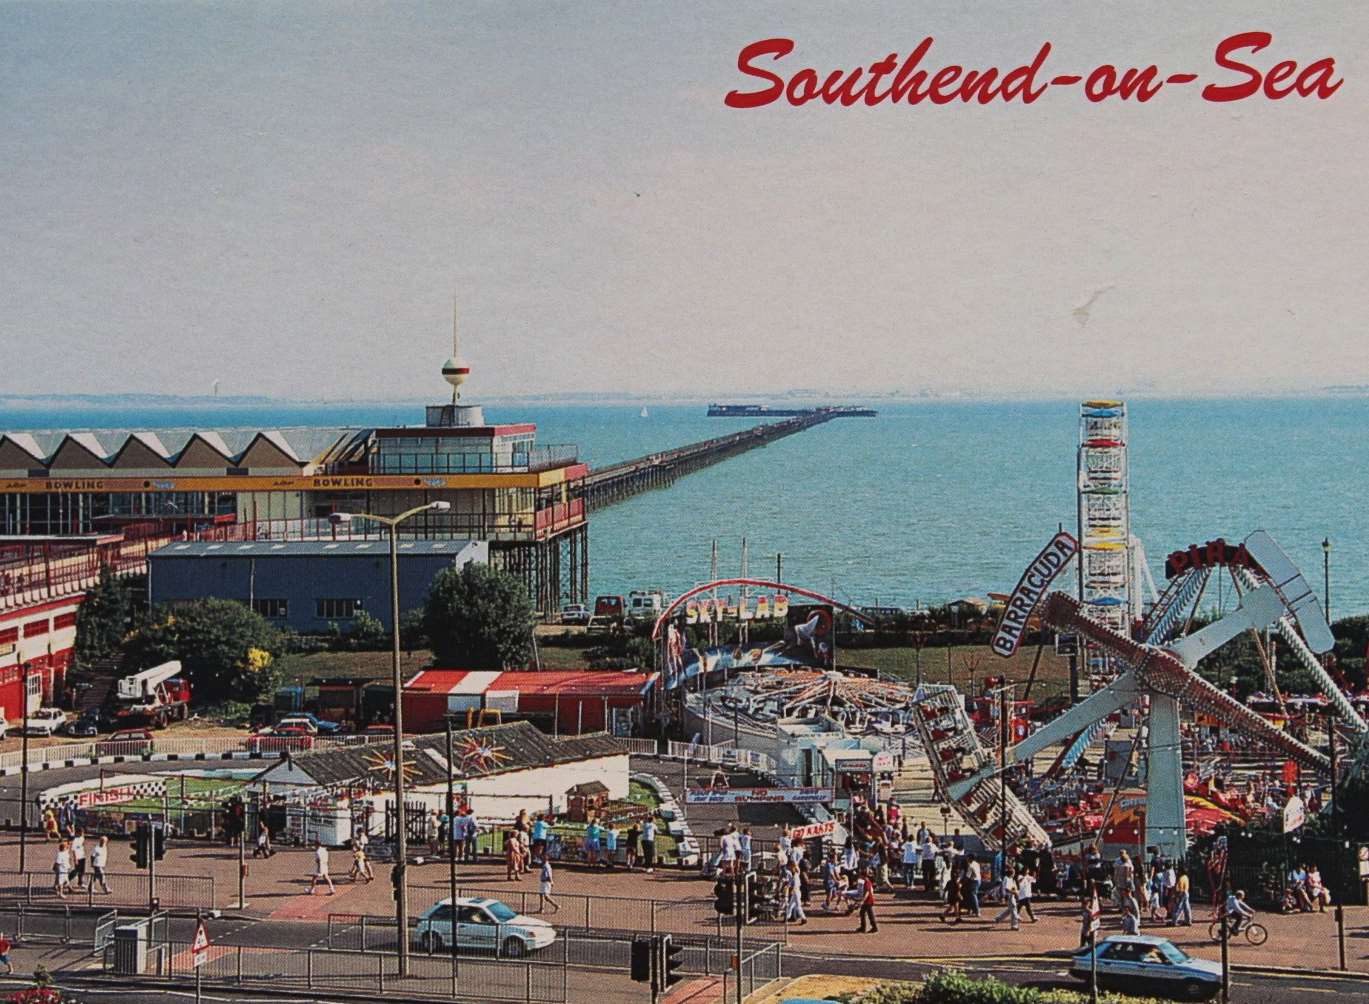 Southend: Postcard of the seafront